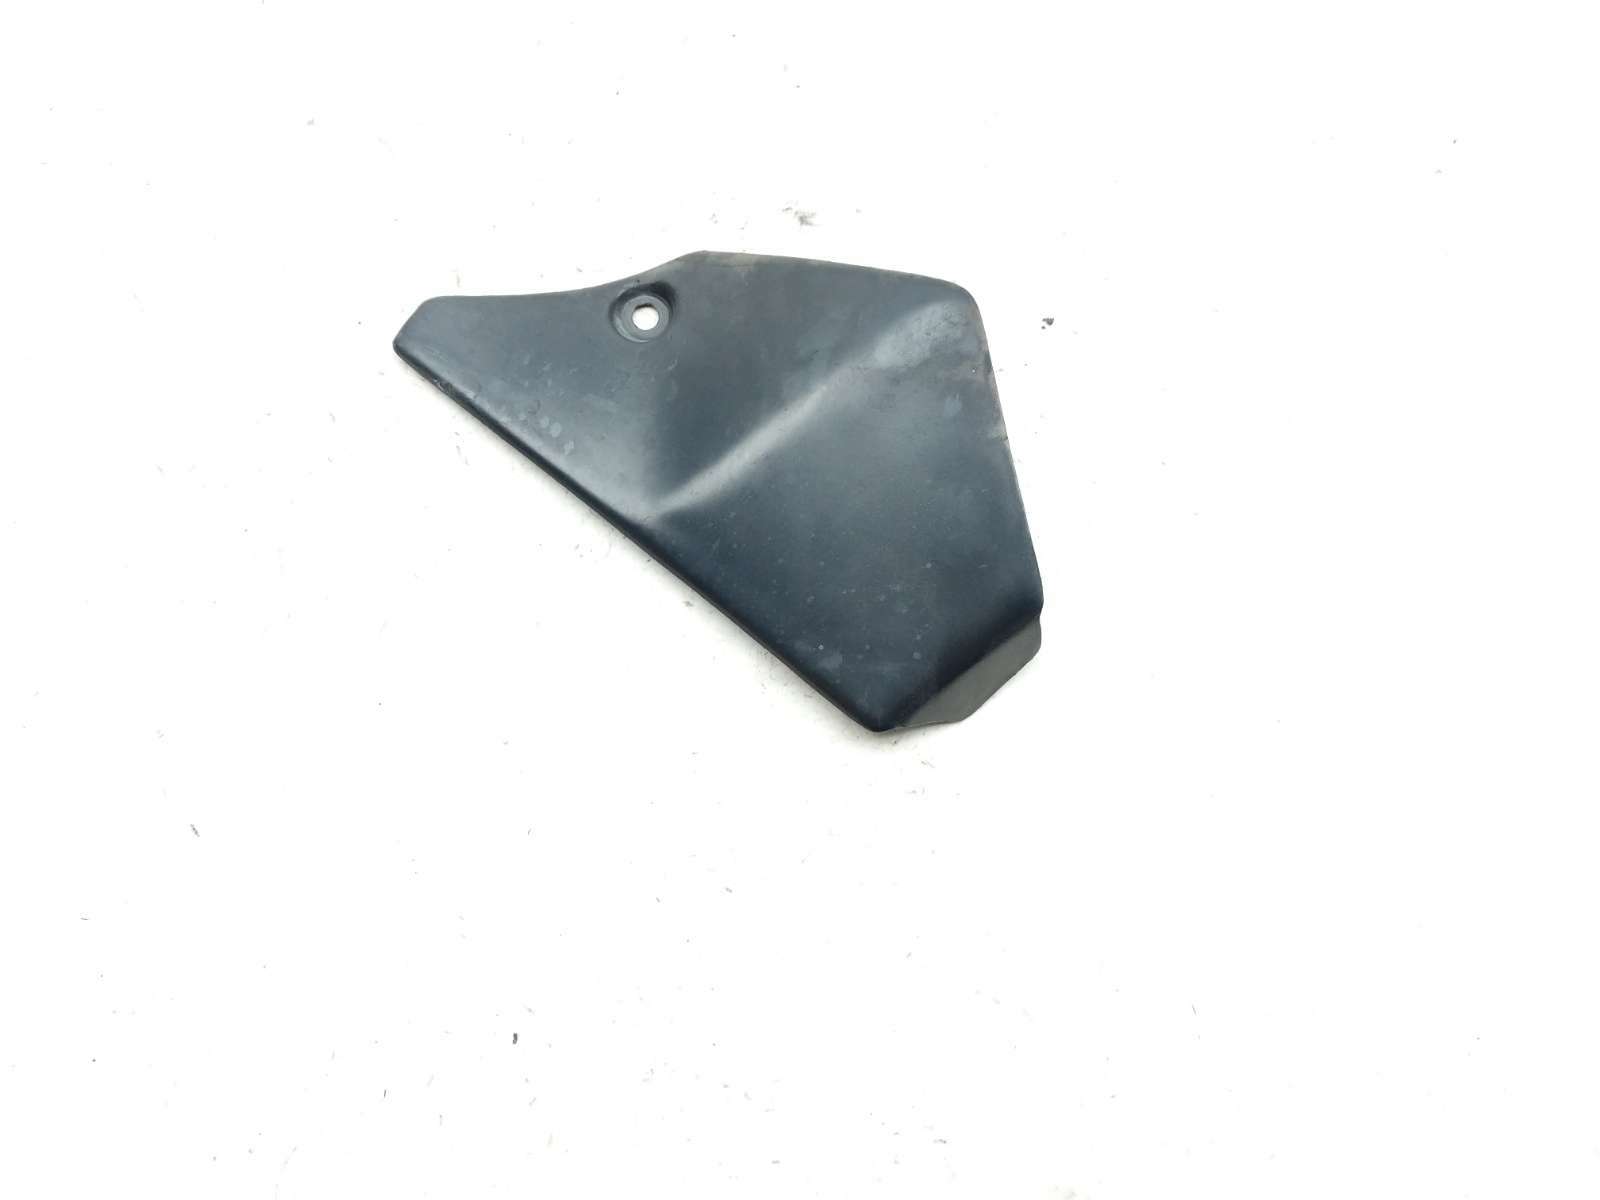 00 Honda Valkyrie 1500 Interstate Front Right Cover Fairing 63500-MZO-0000 TRSH DW $8.00